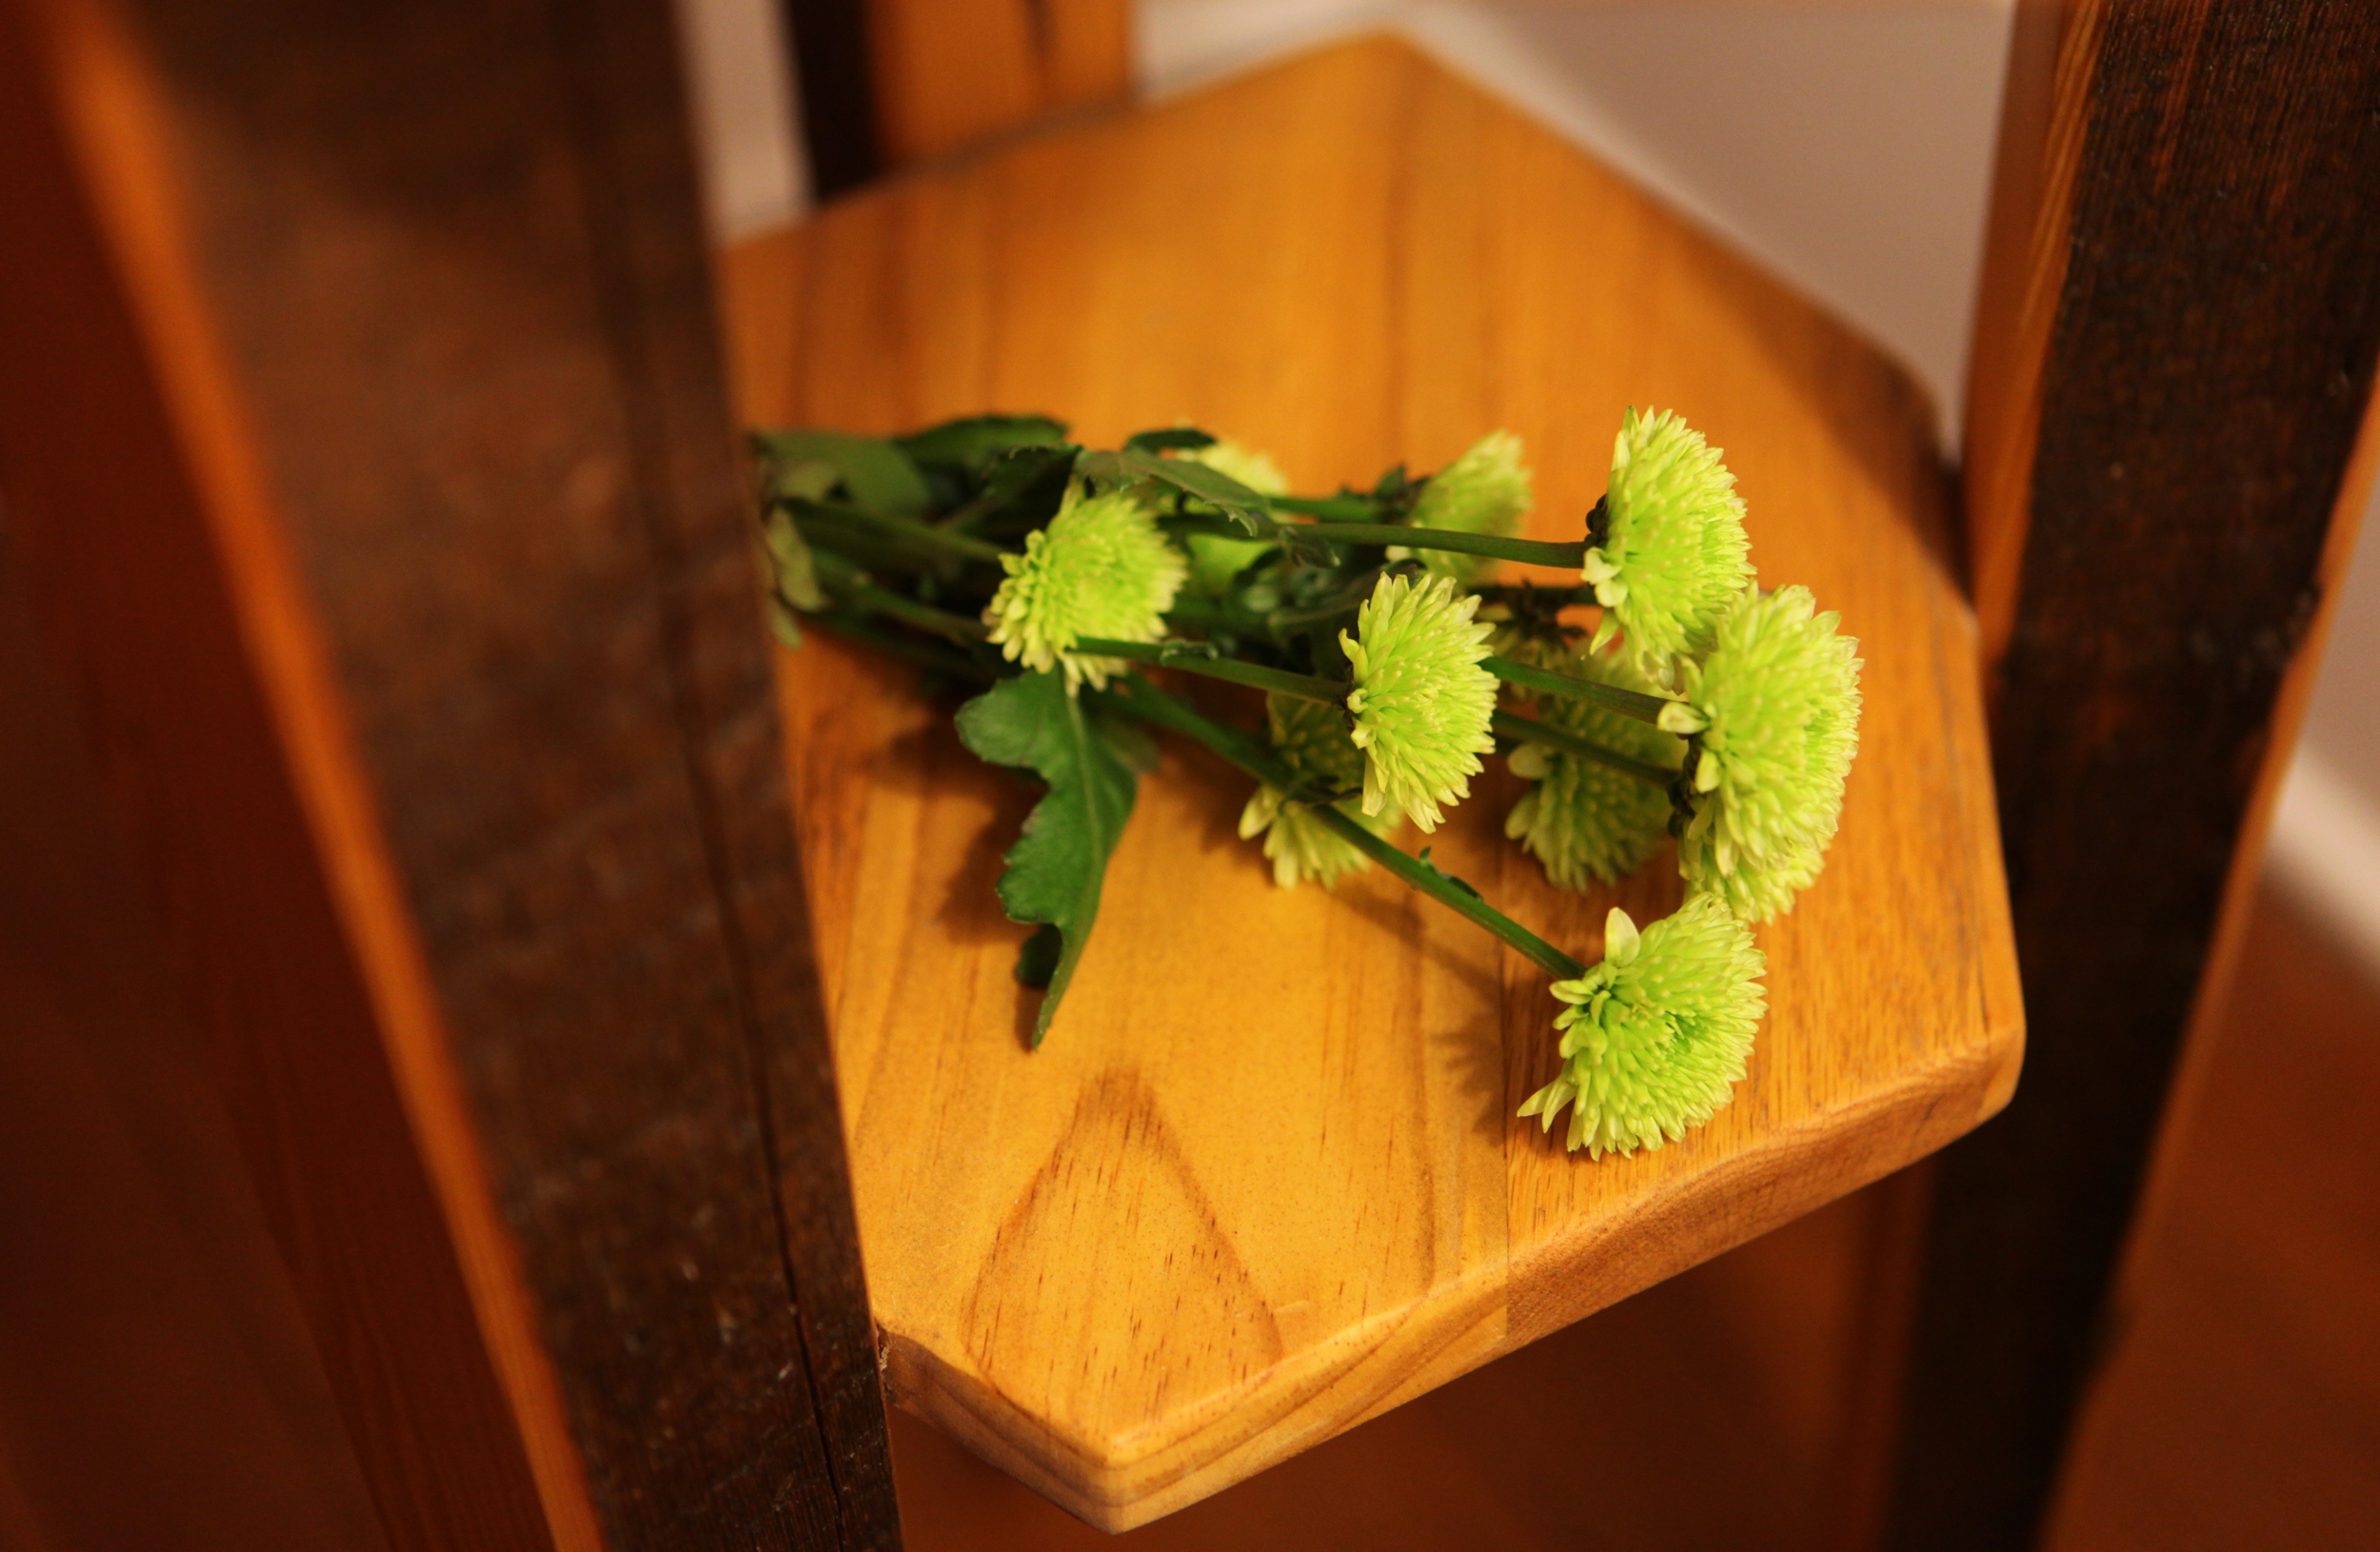 evs table with green flower.jpg